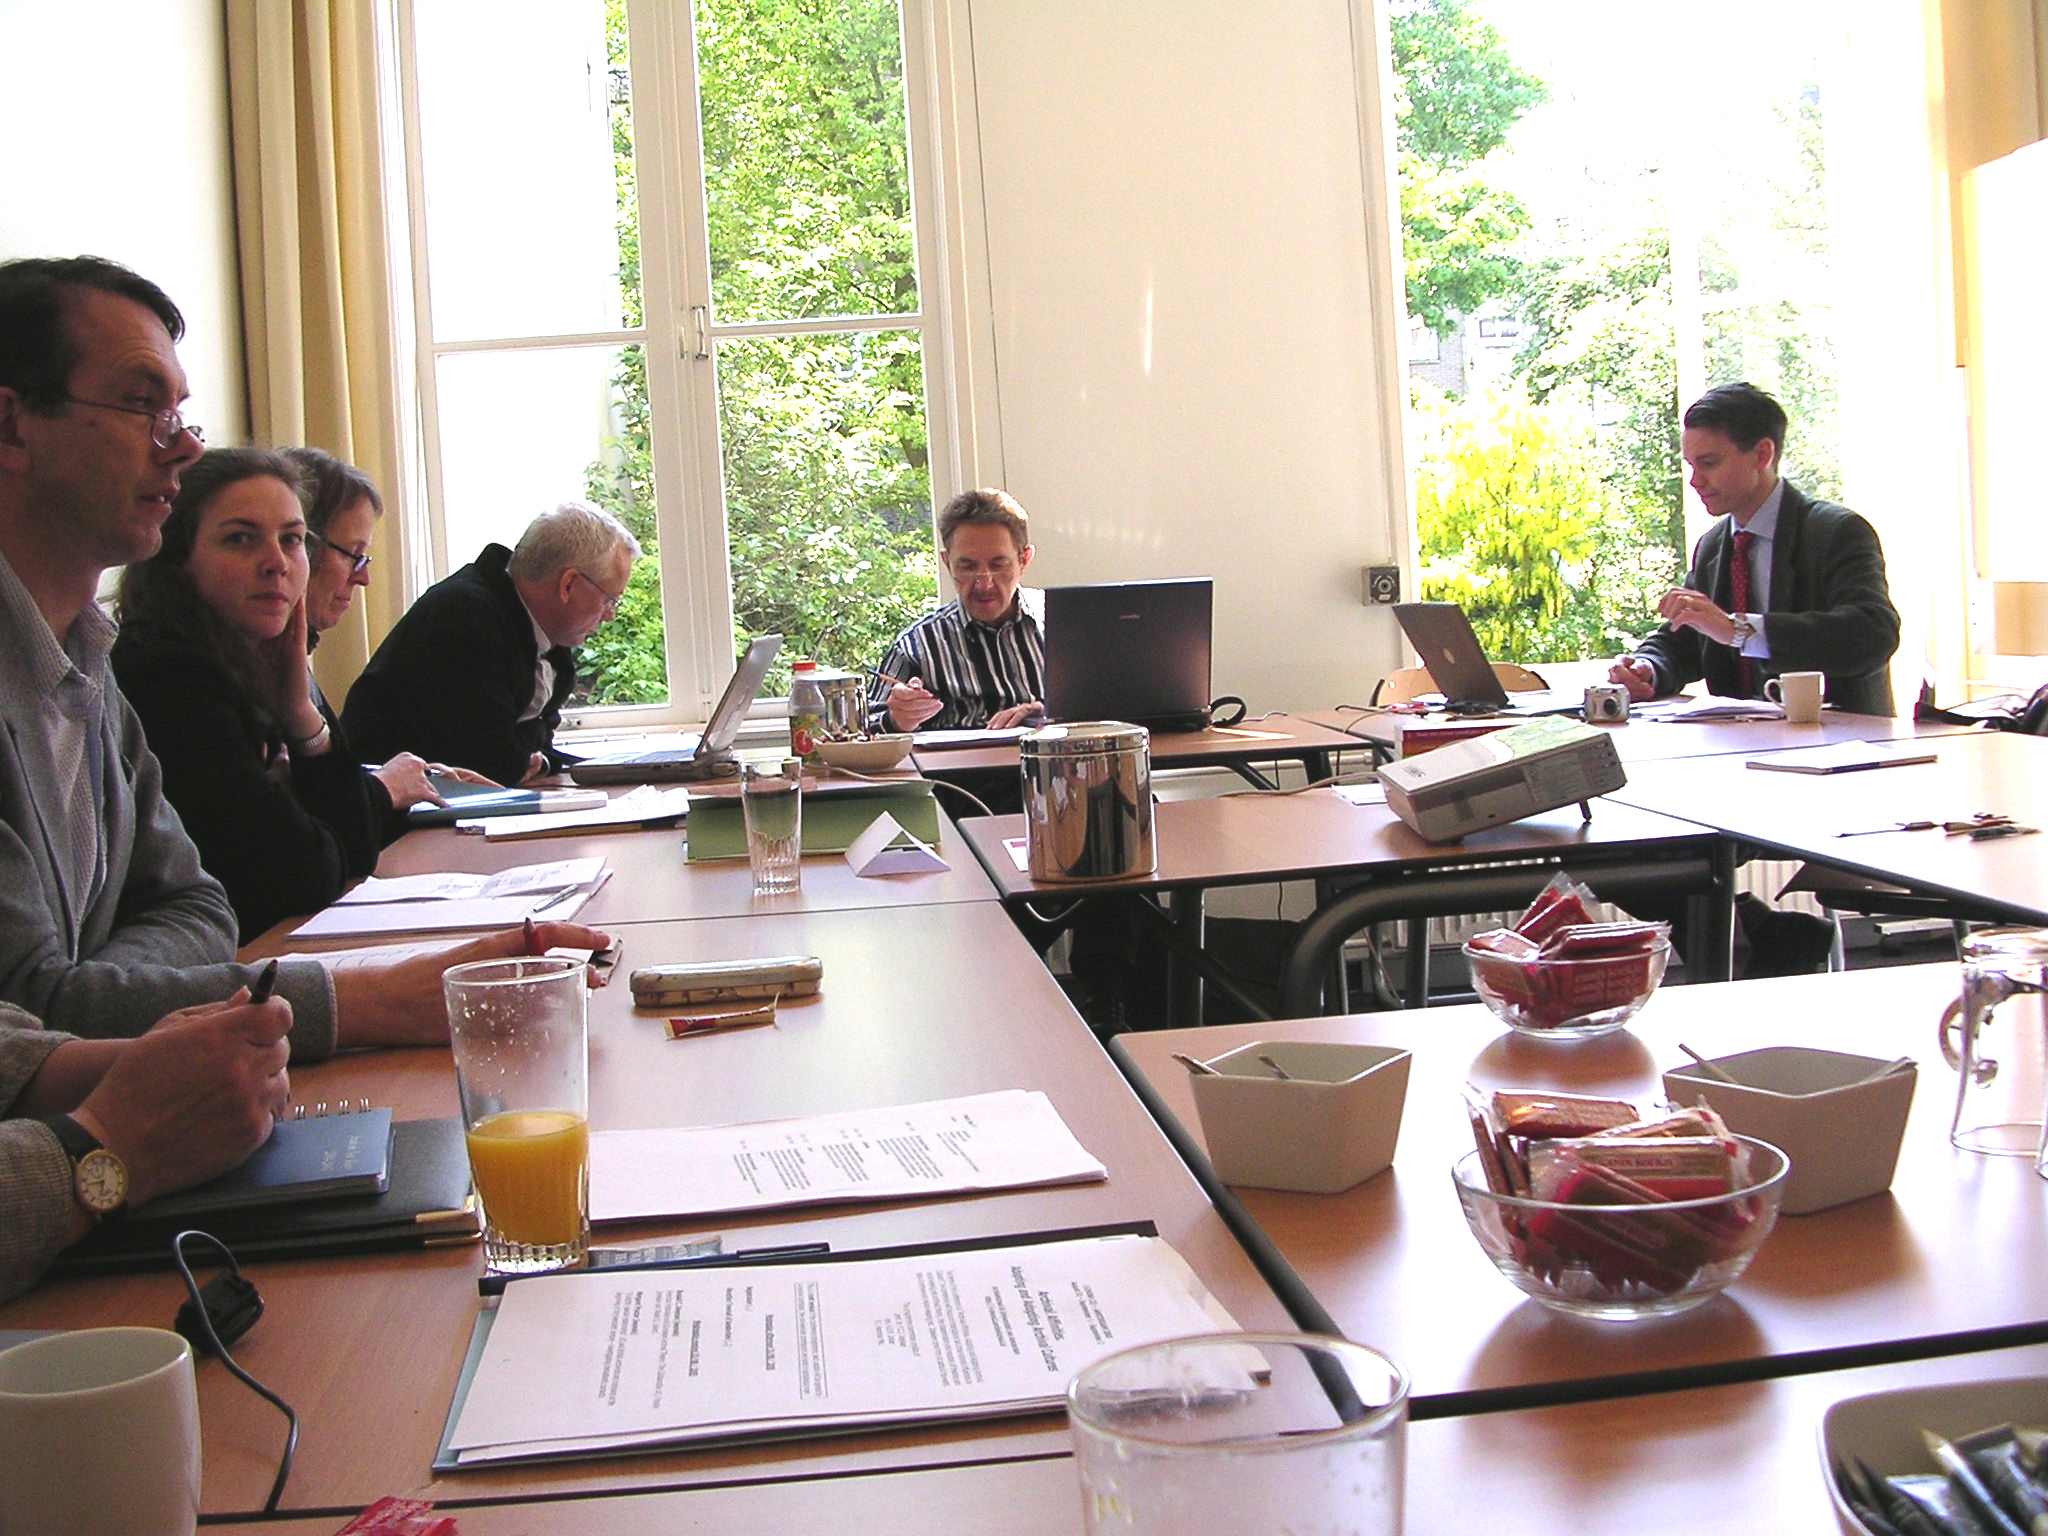 Discussion during the first meeting in Amsterdam - Foto: Archivschool Amsterdam 